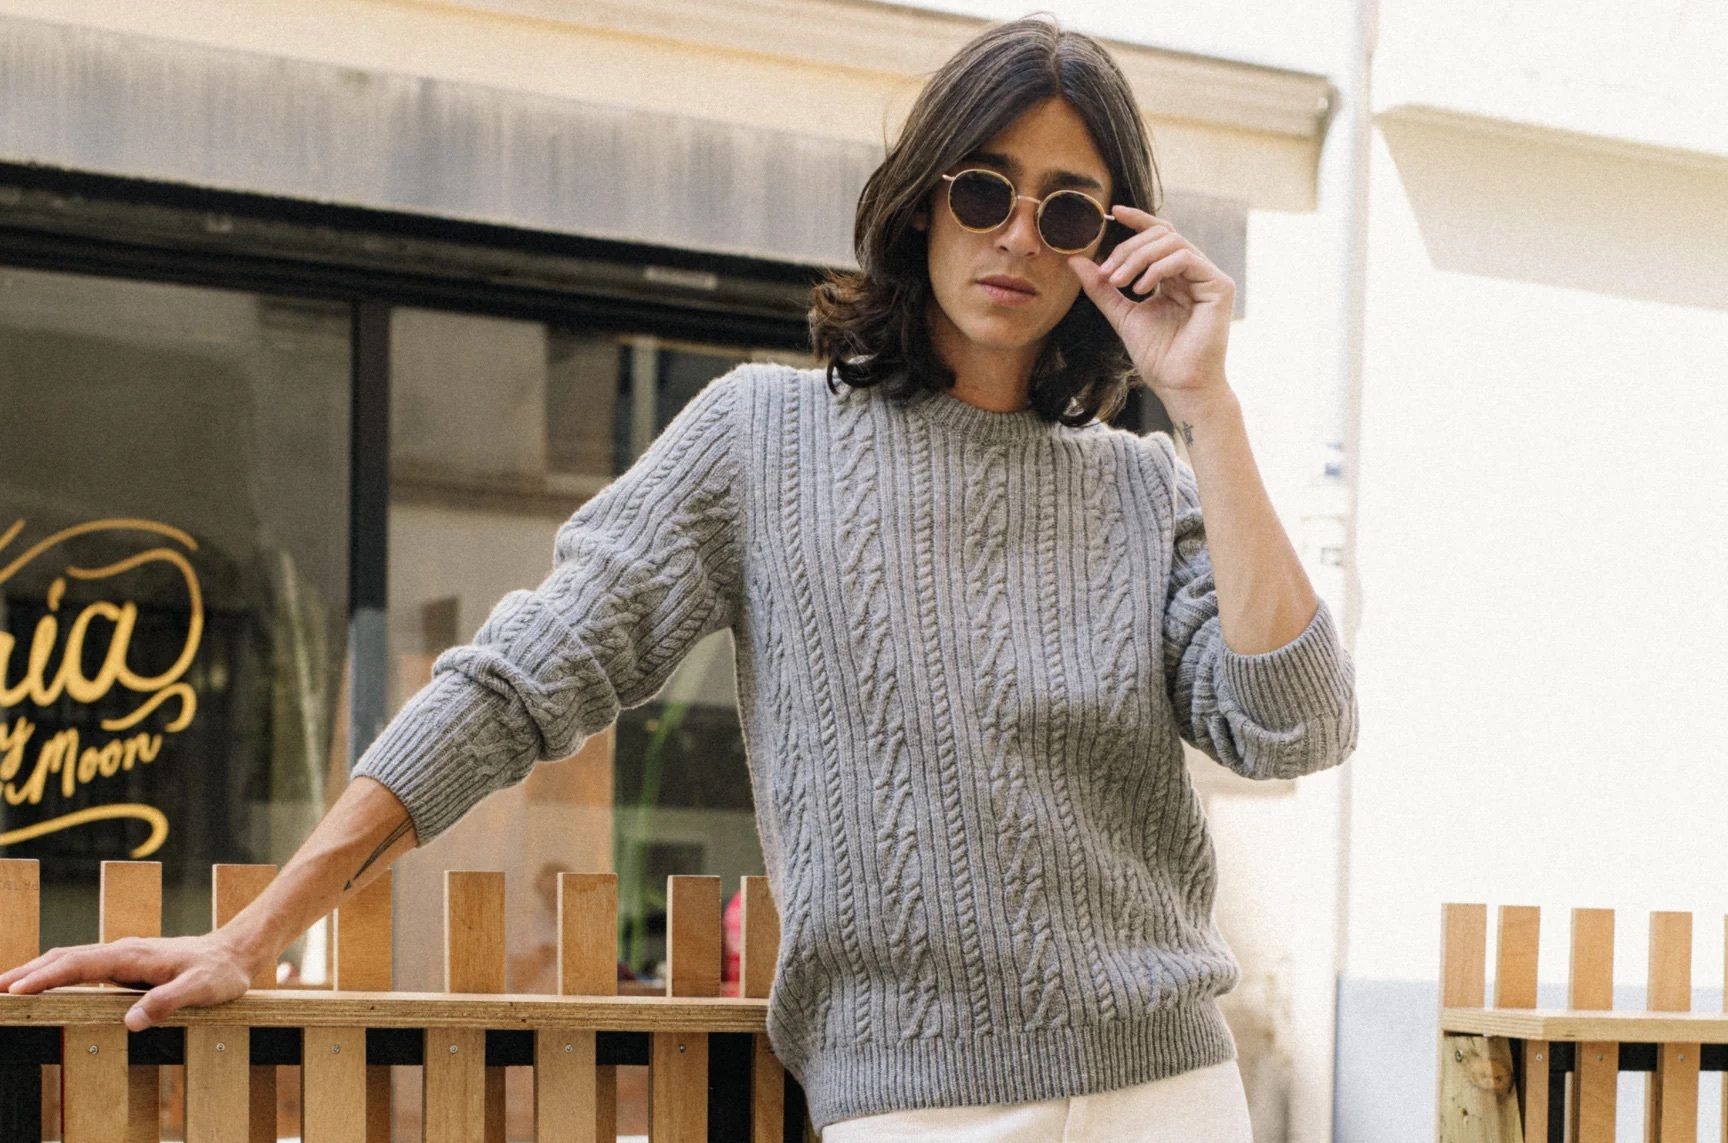 Leo Cable-knit Sweater - Forlife